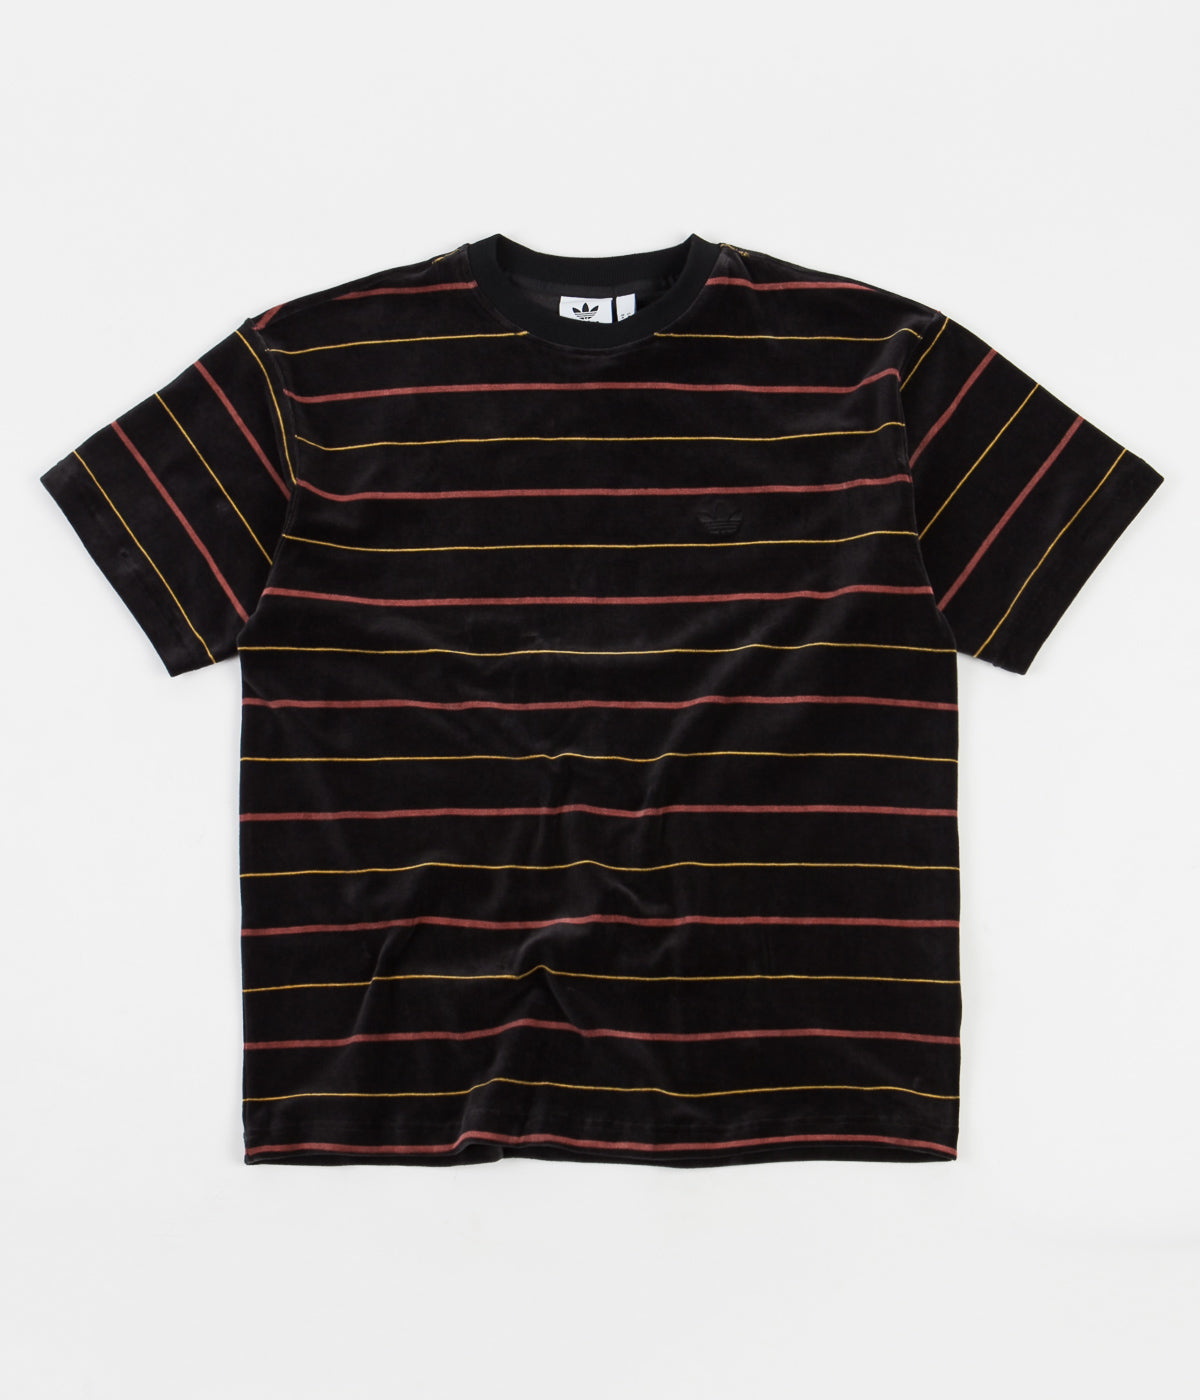 Adidas Velour Jersey - Black / Legacy Red / Legacy Gold / Off White ...